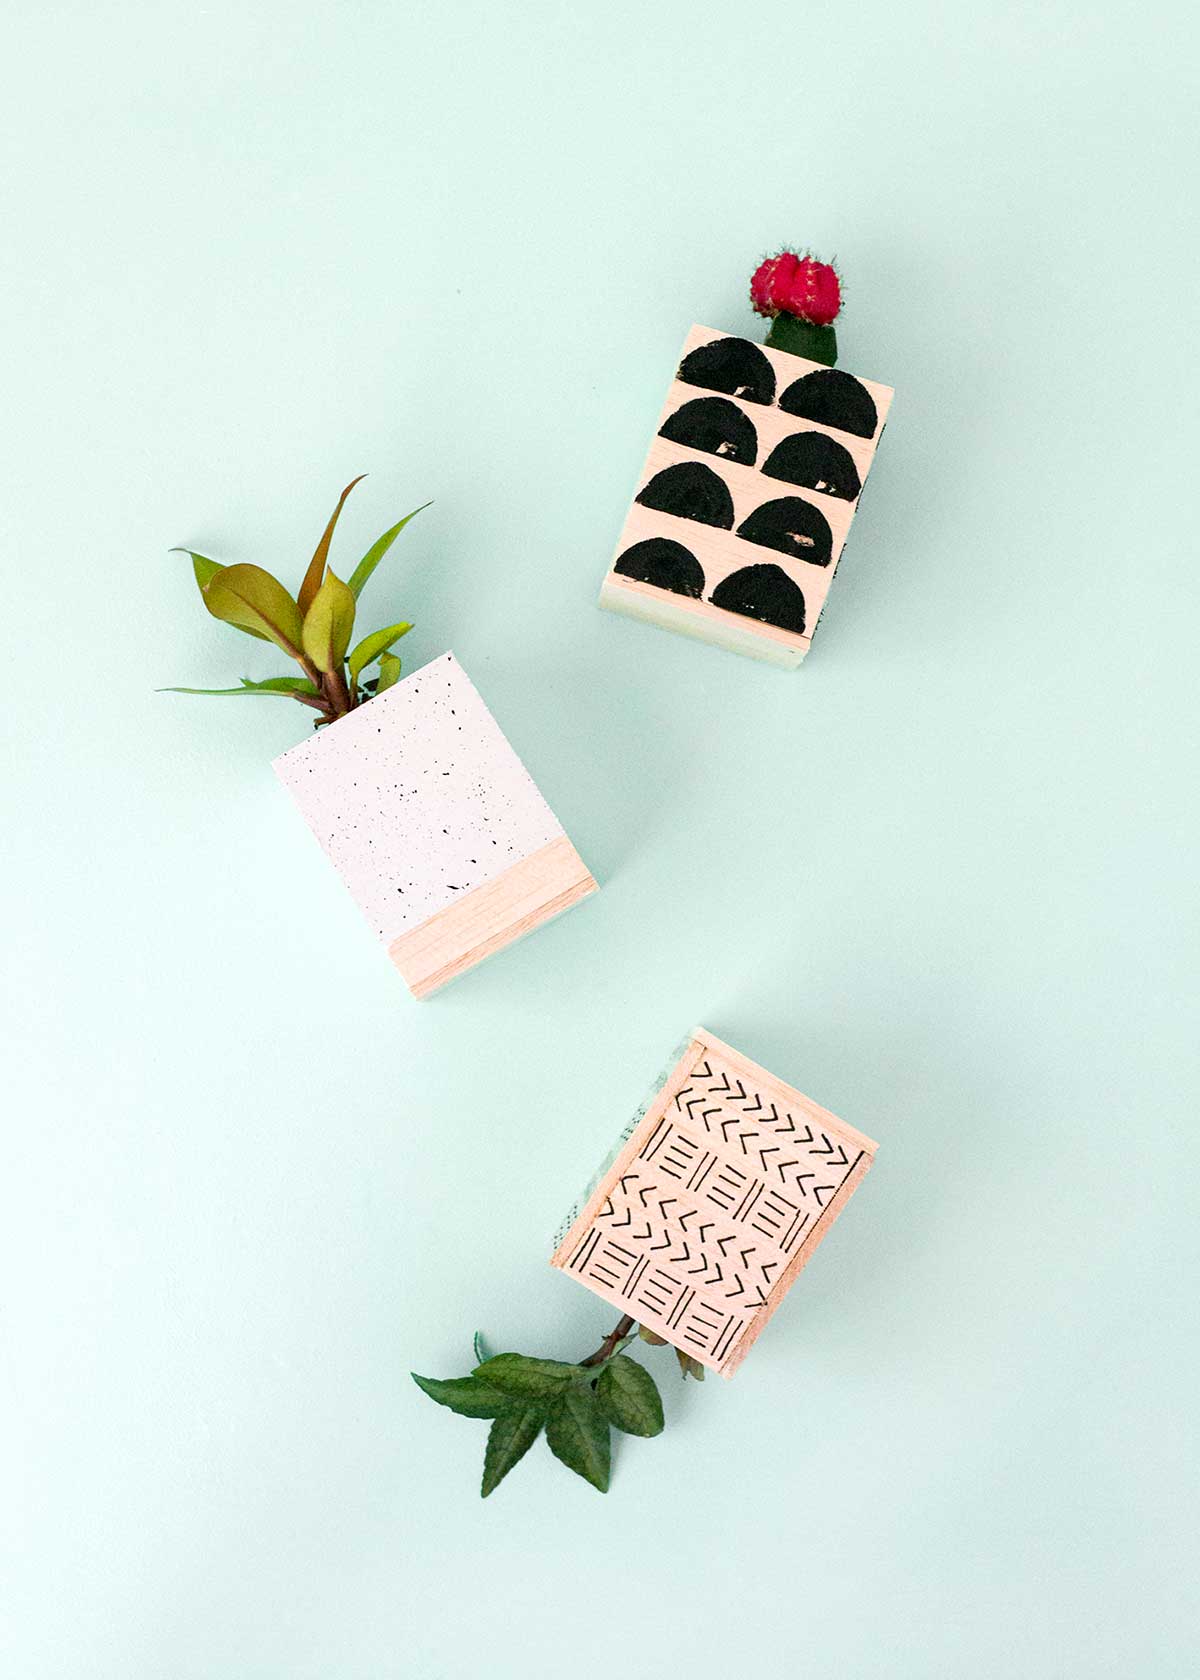 DIY balsa wood plant pots - Make and Tell for Curbly